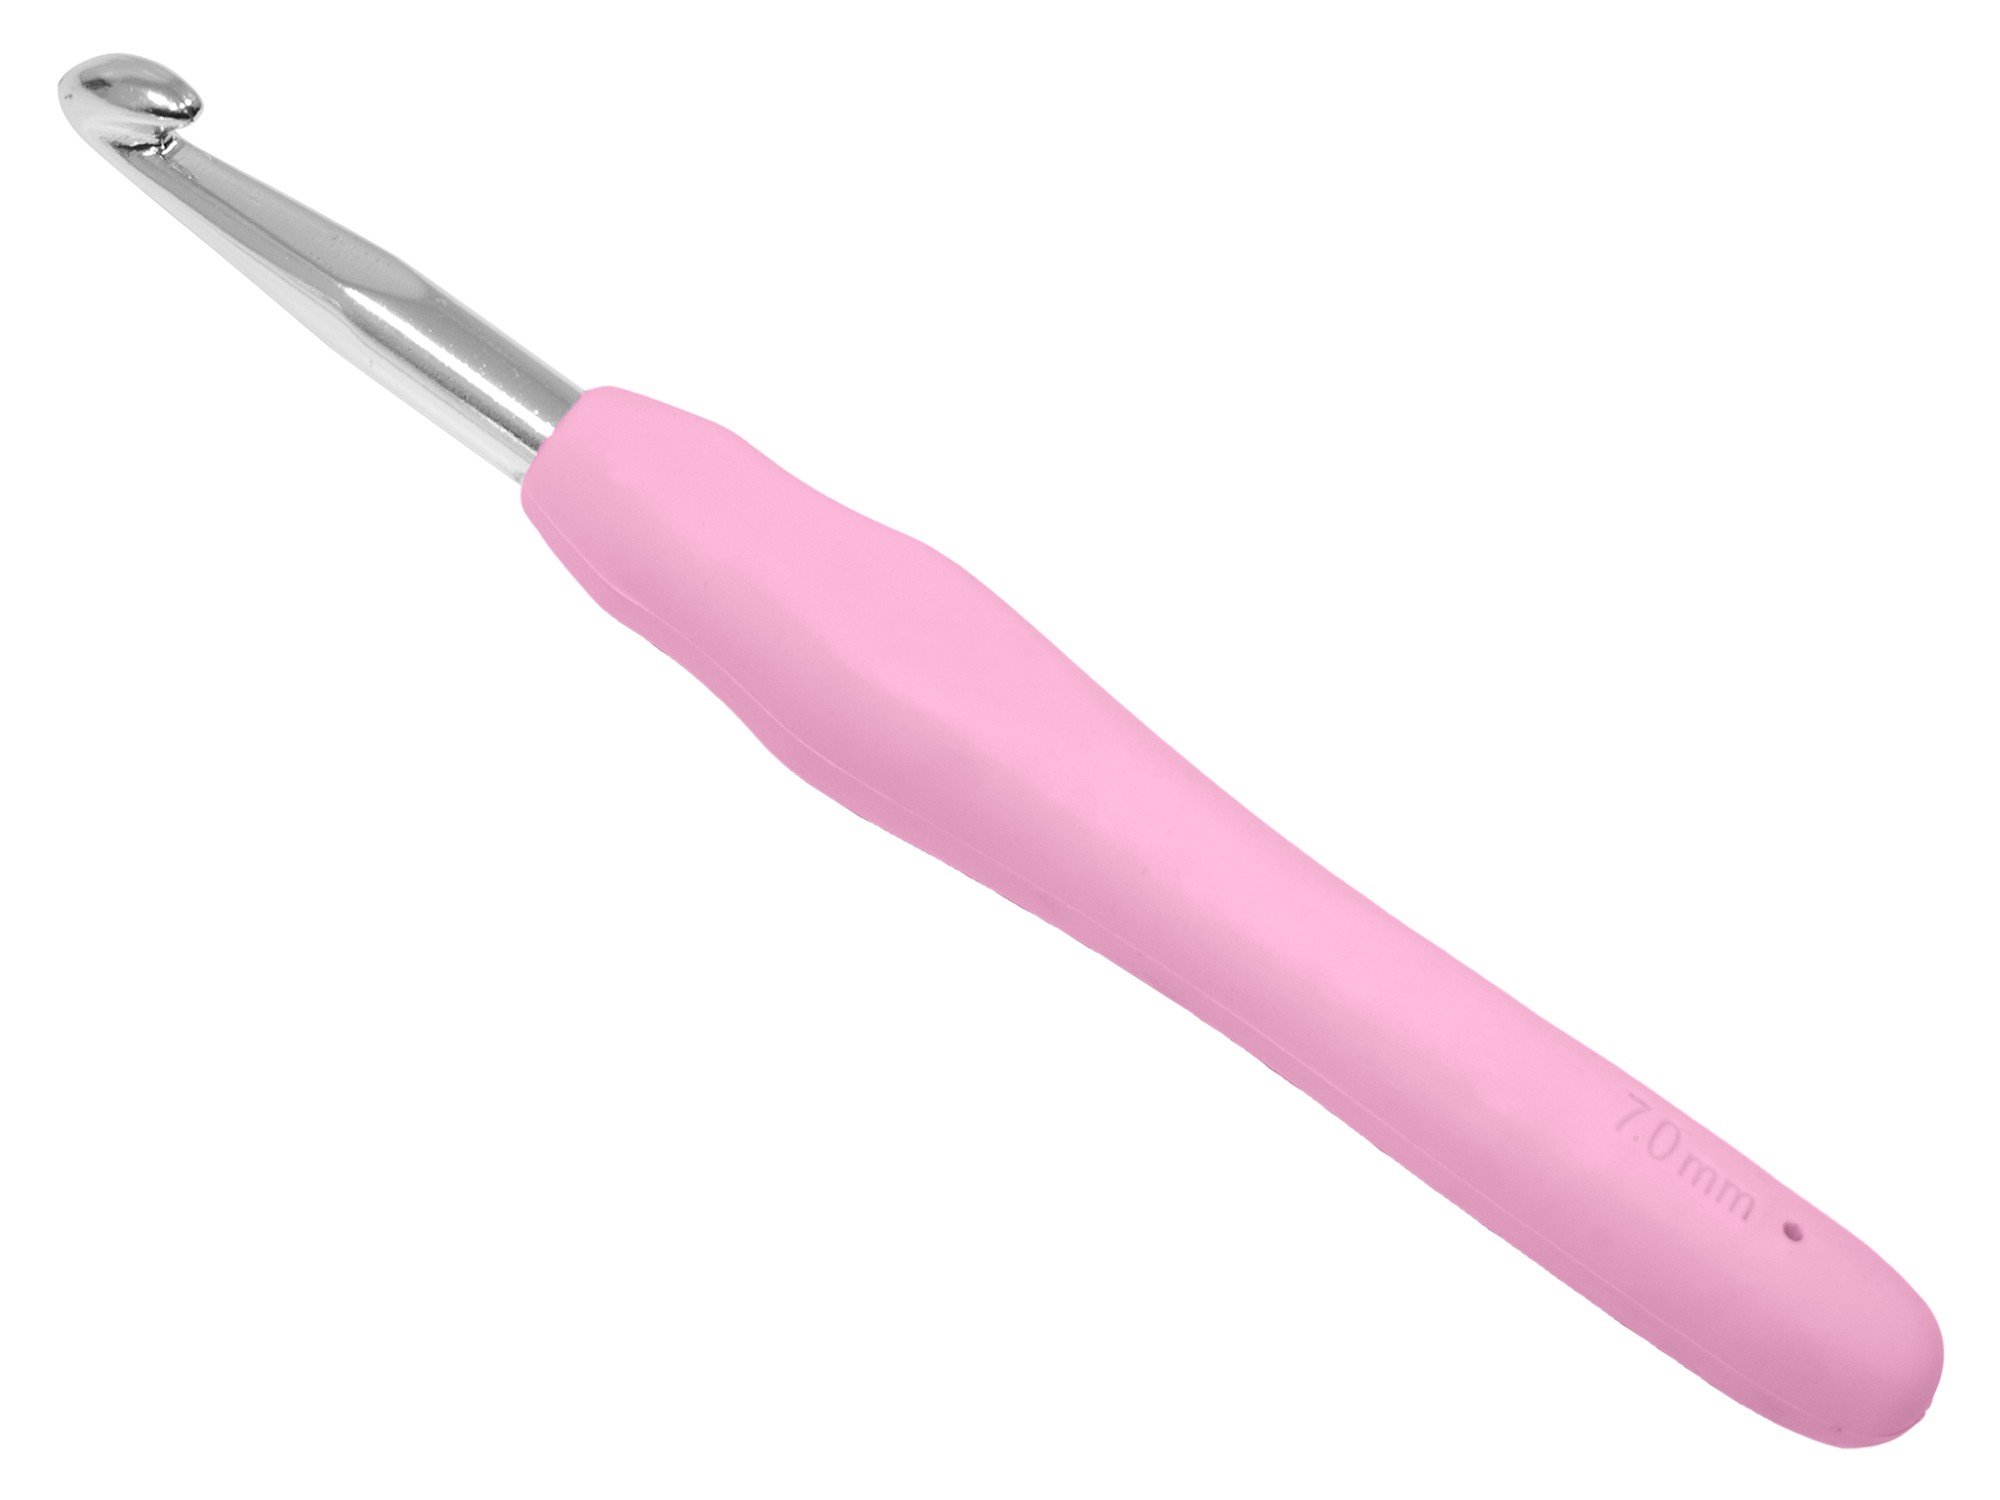 SILICONE CROCHET HOOK 7MM